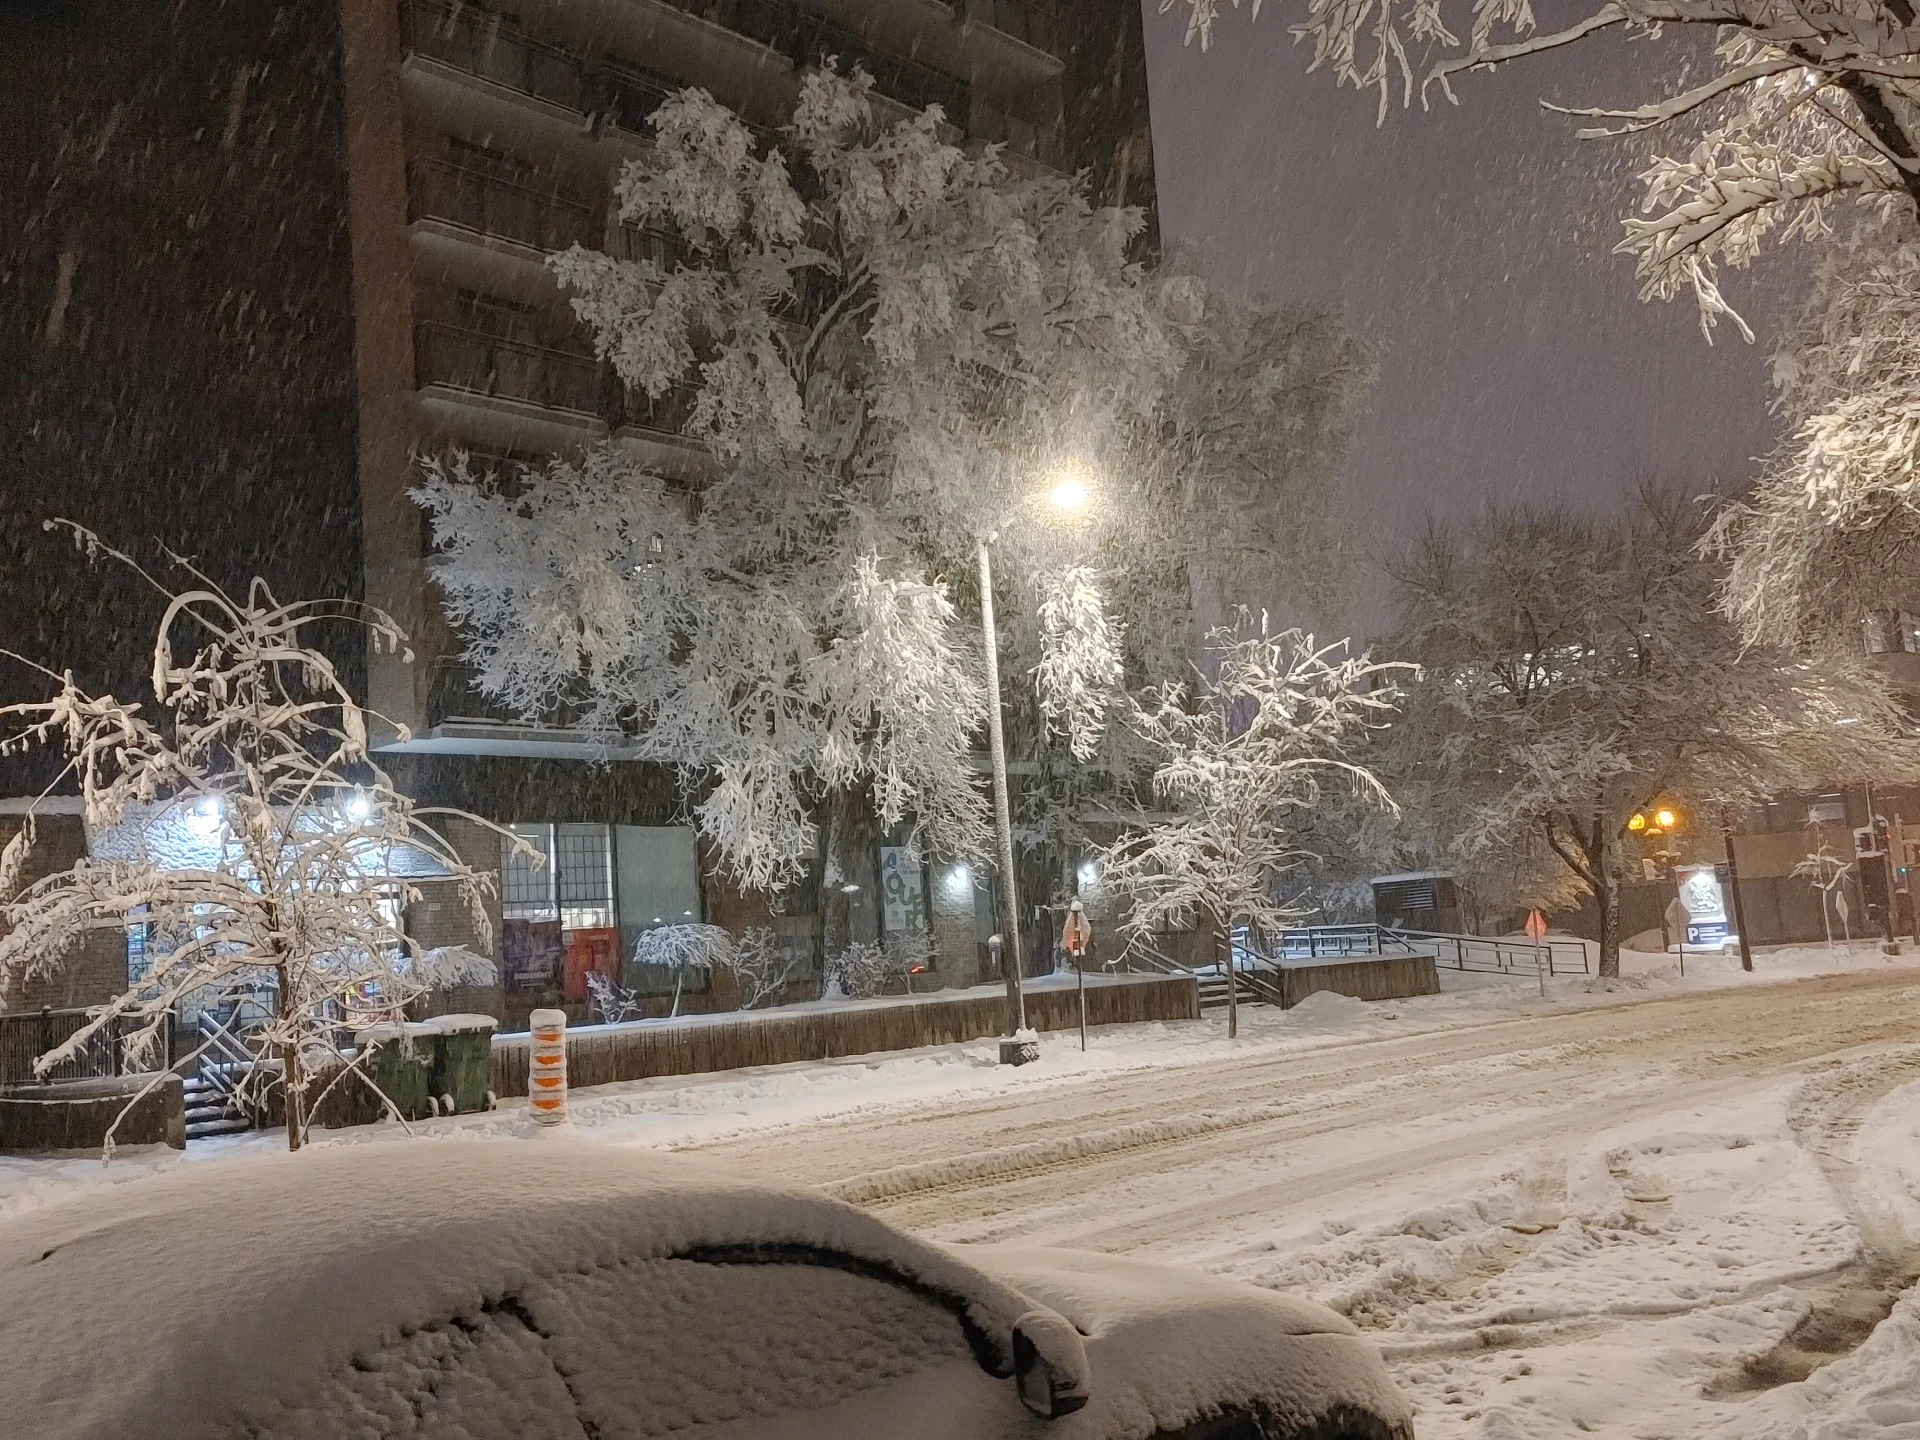 Snowfall totals add up in Eastern Canada after impactful, wintry wallop